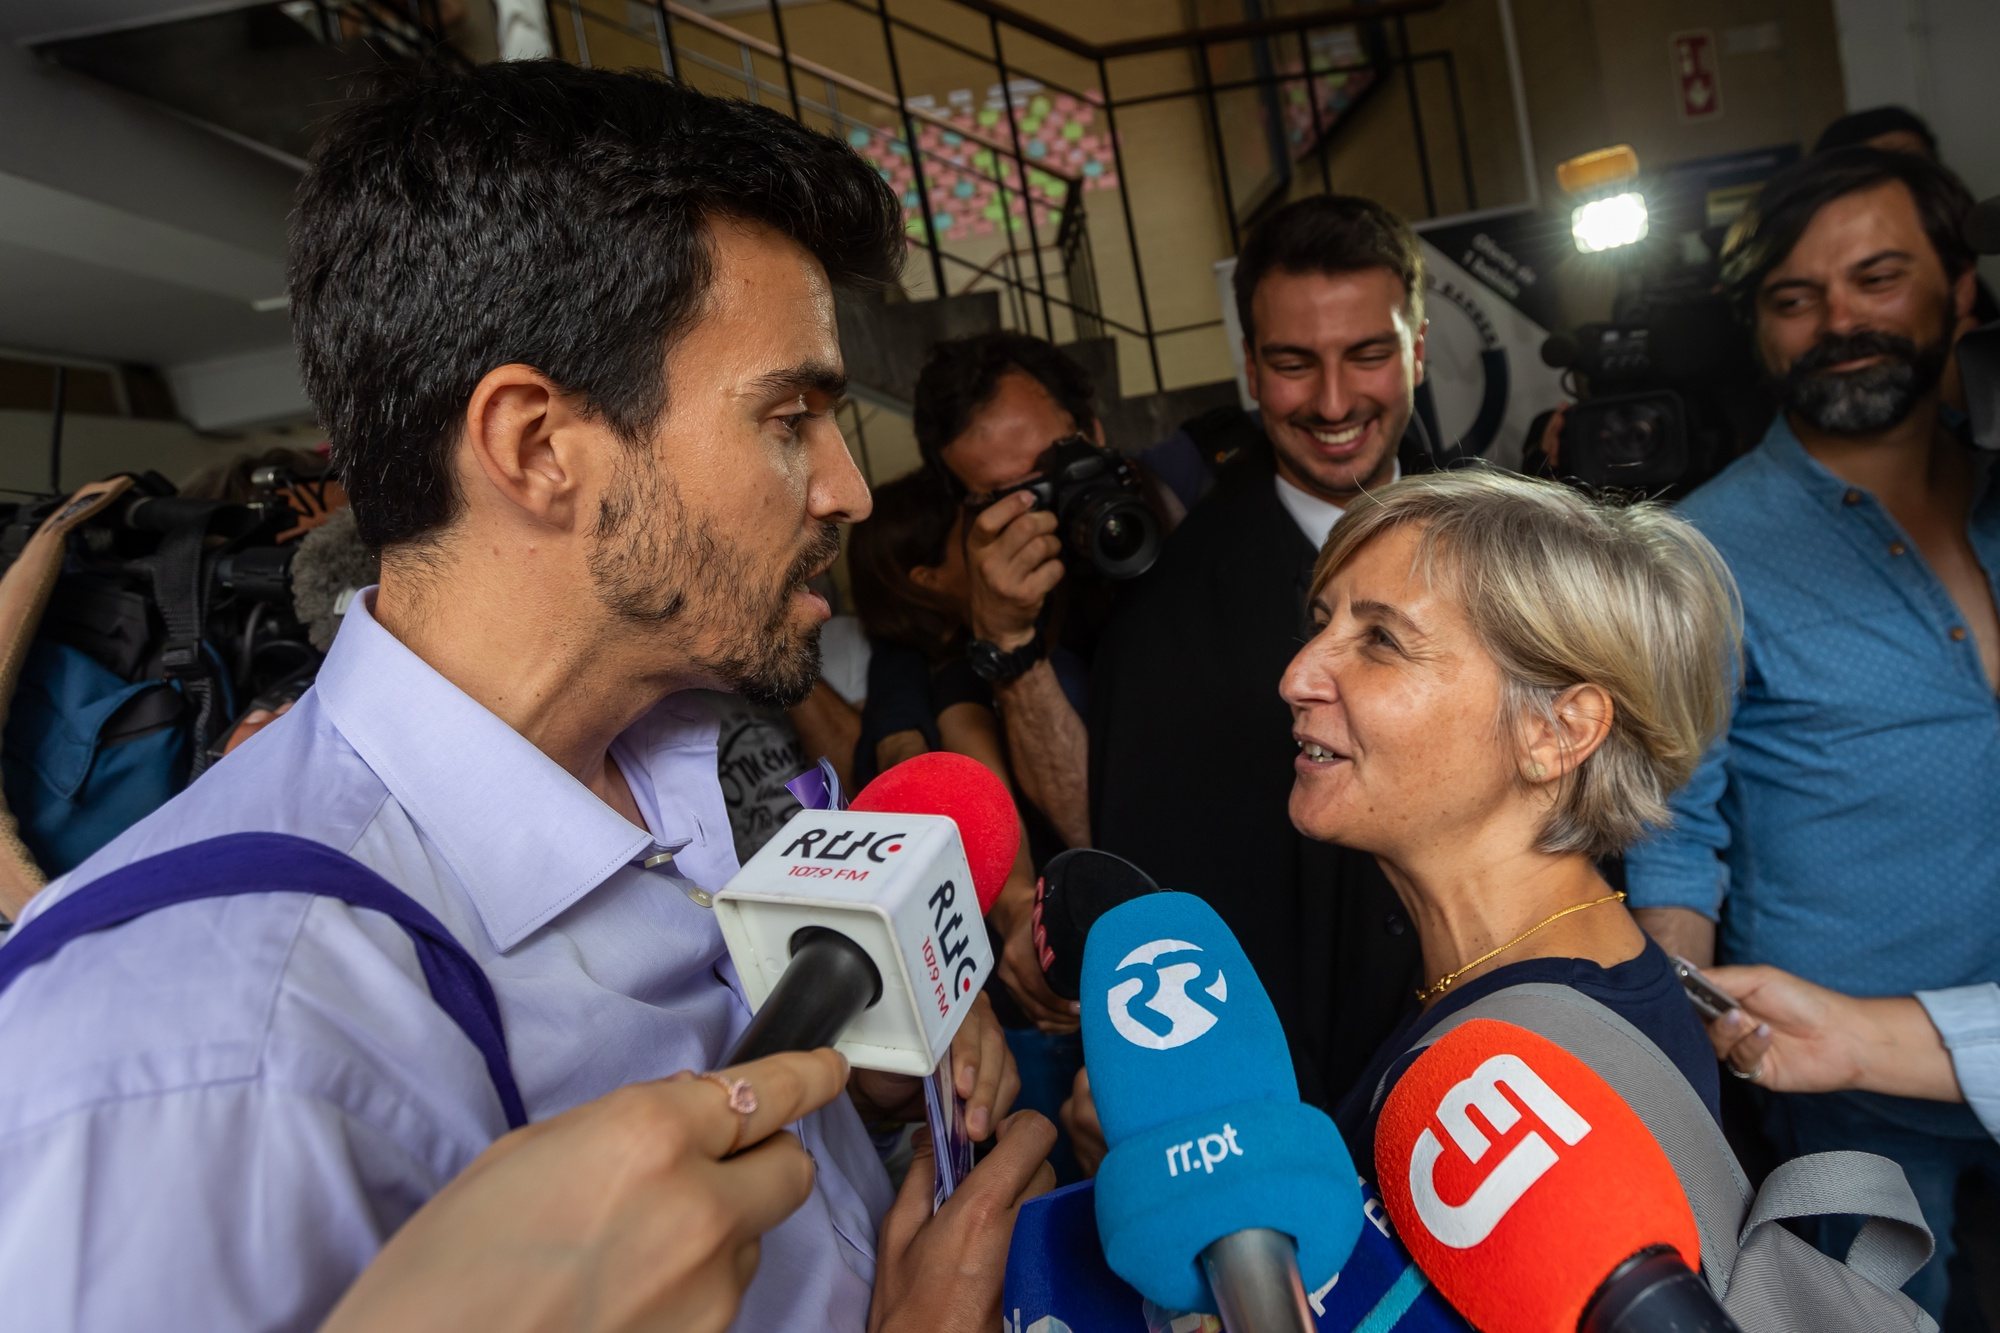 The candidate for the European Parliament for Socialist Party (PS), Marta Temido (R), talks to the Volt candidate for the european elections, Duarte Costa, during a visit to Coimbra Academic Association as part of the campaign for the 2024 European elections in Coimbra, Portugal, 06 June 2024. In Portugal, the European elections take place on 09 June and will be contested by 17 parties and coalitions. JOSE SENA GOULAO/LUSA